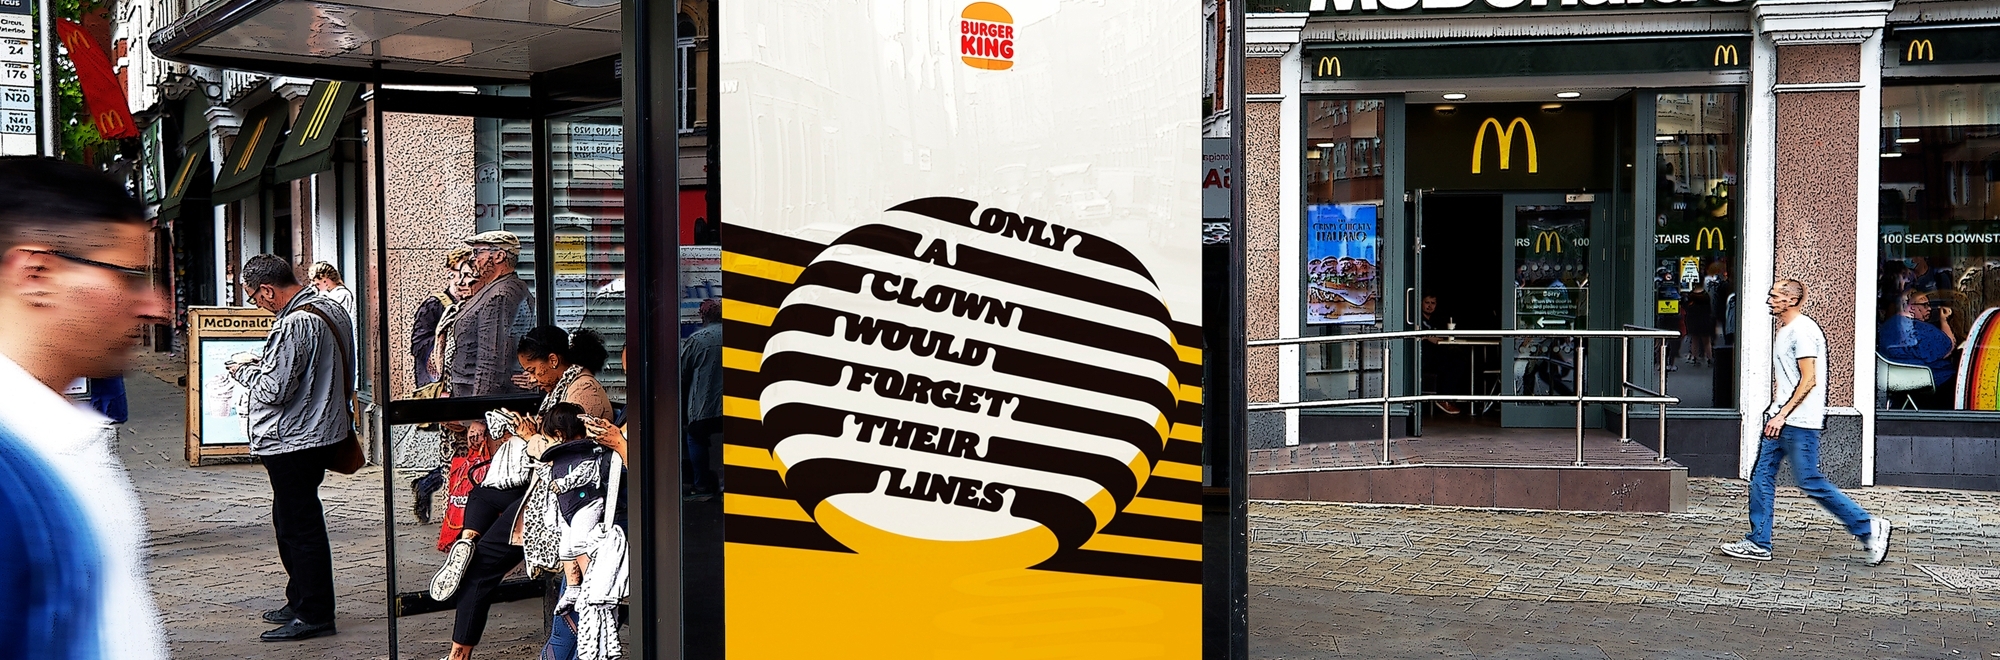 BBH puts the Burger King Whopper’s famous flame grill lines at the heart of its latest creative campaign